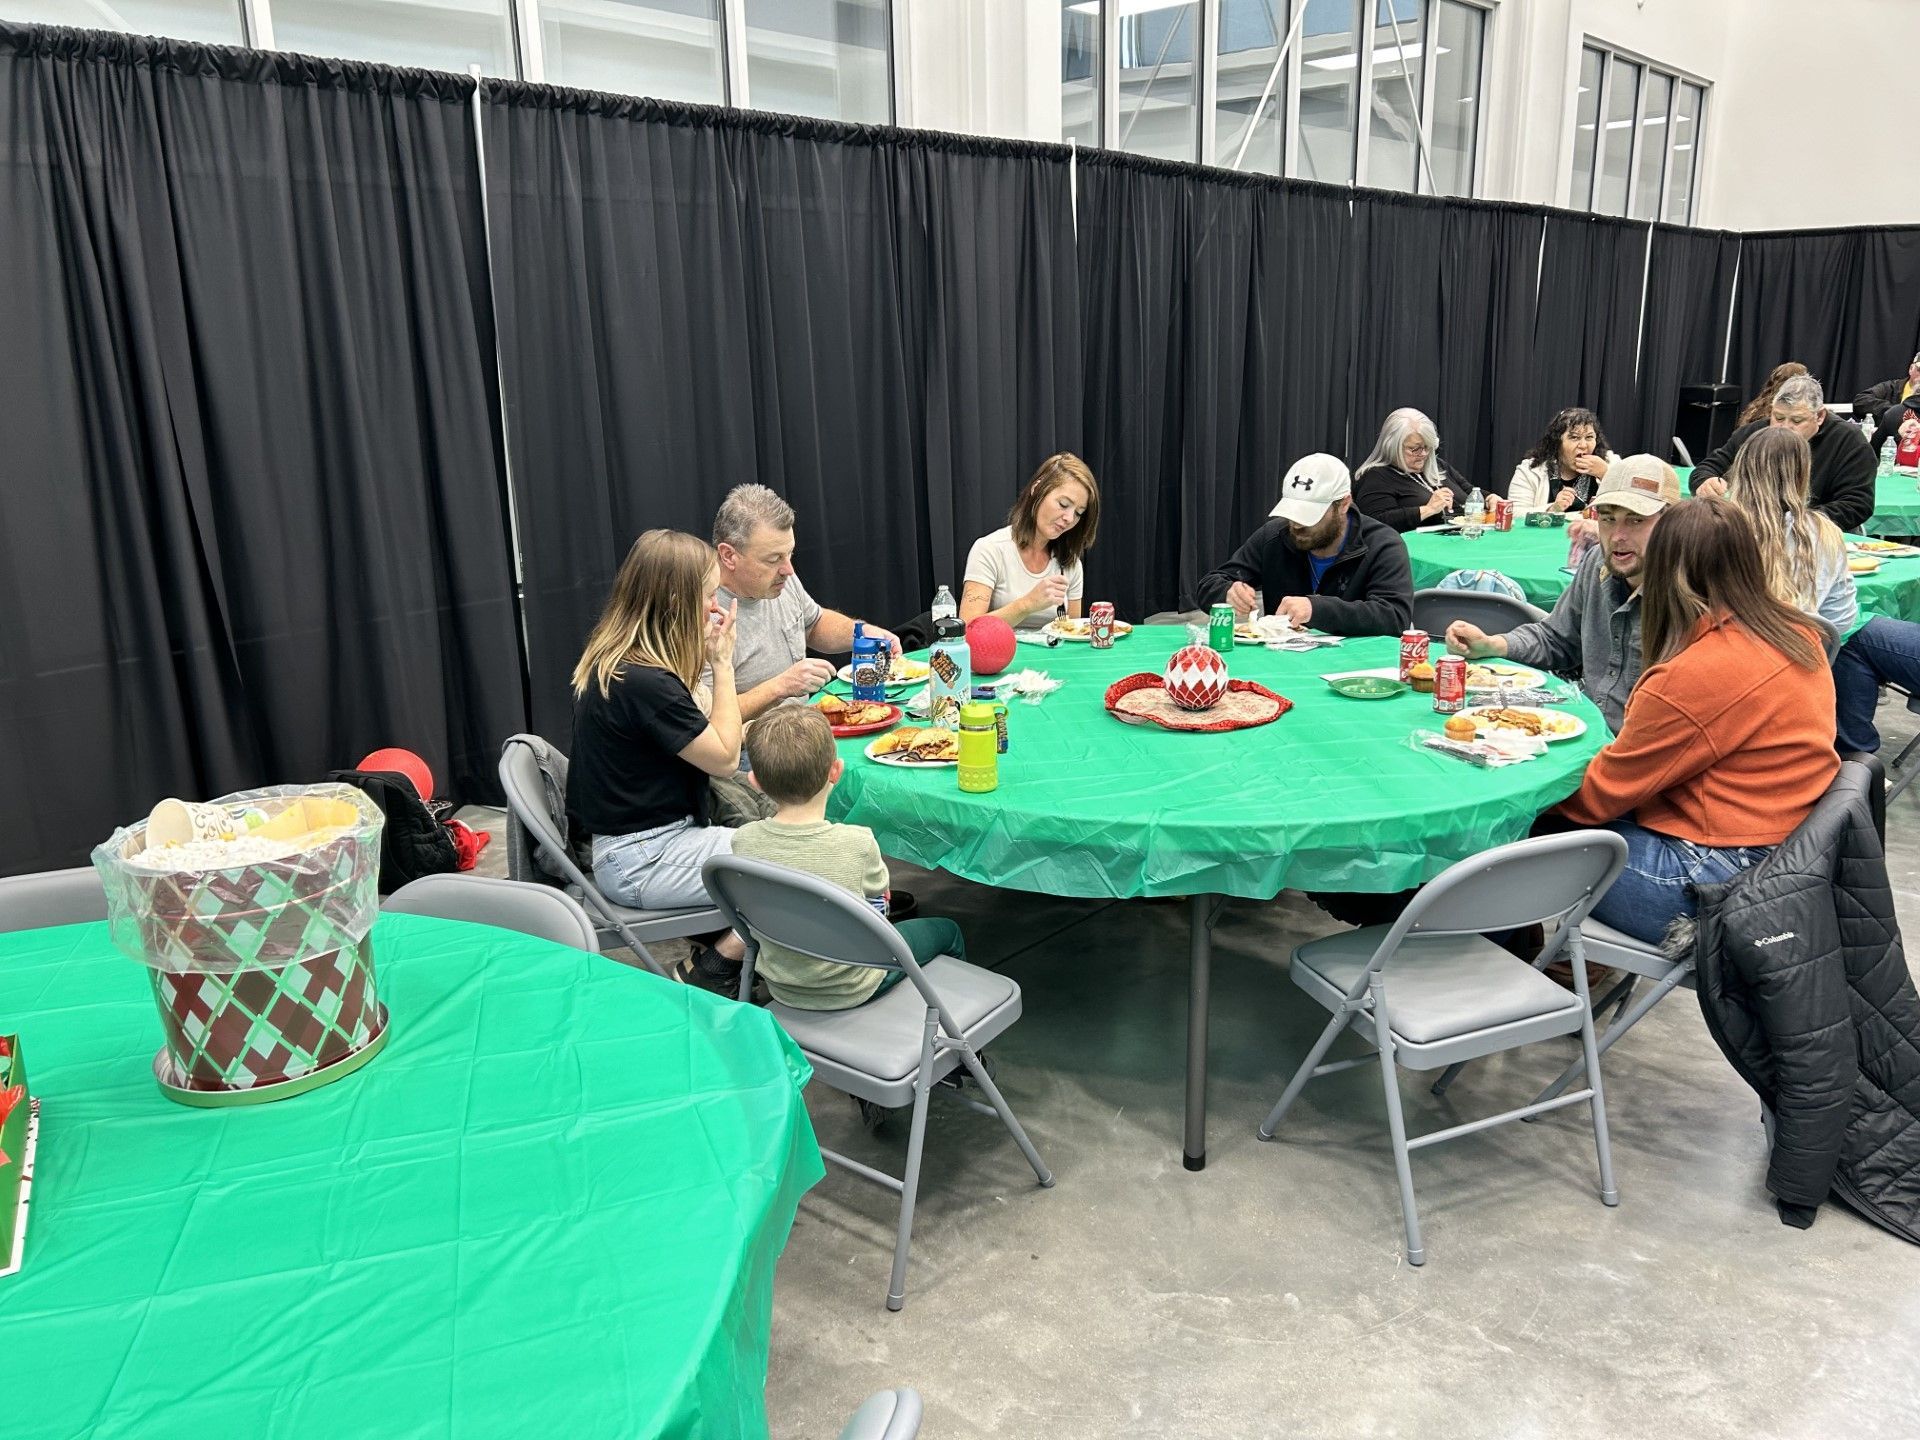 a group of people are sitting at tables with green tables cloths .